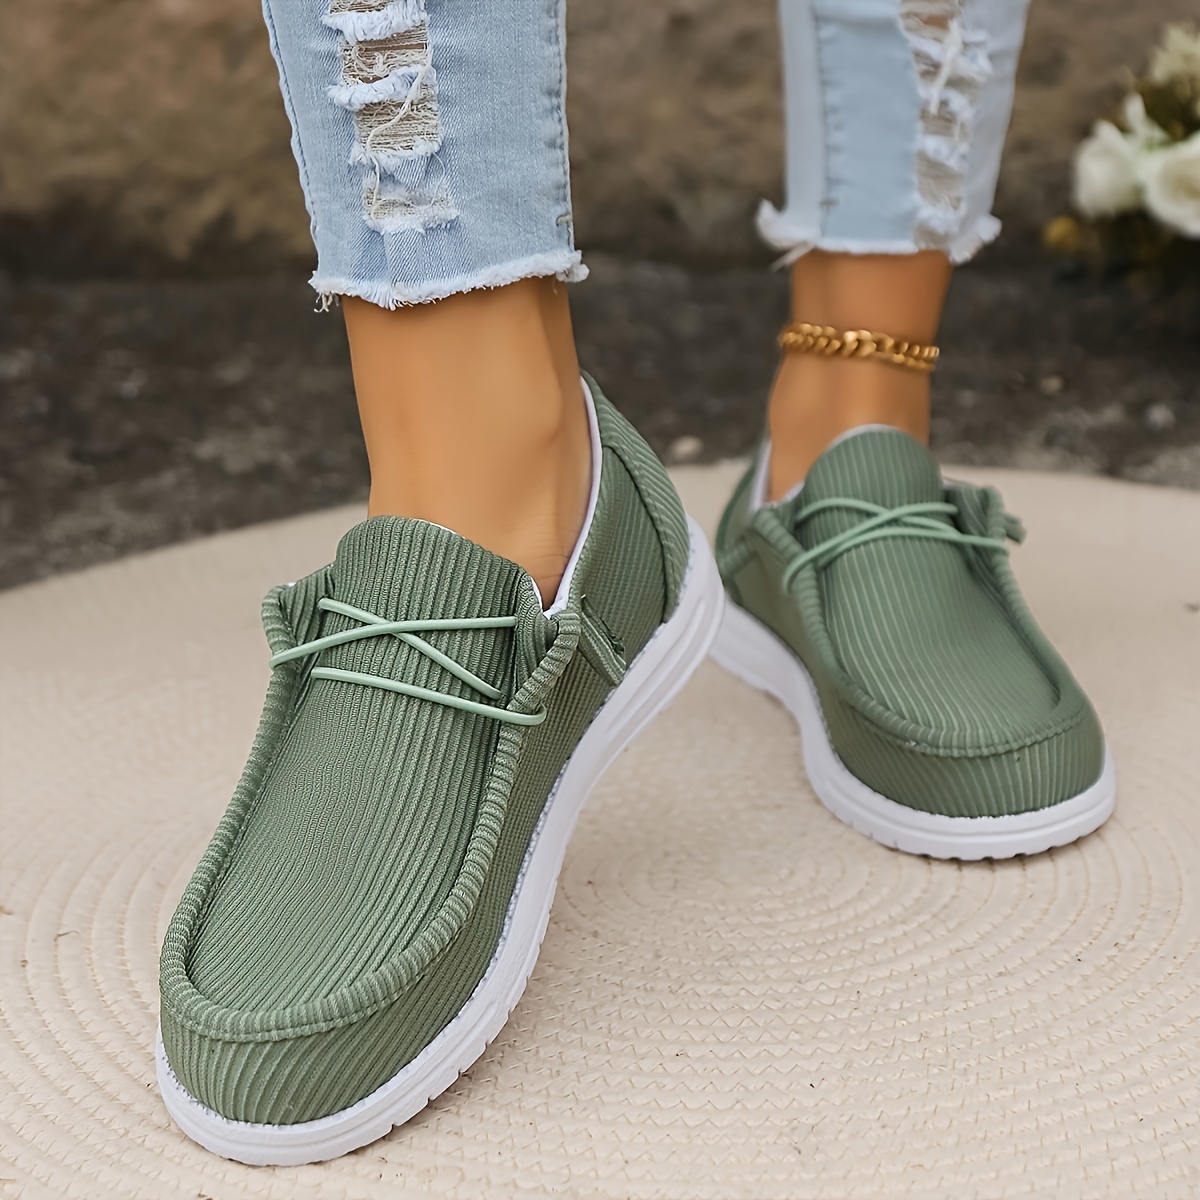 Women s Solid Color Casual Sneakers, Slip On Lightweight Soft Sole Walking Shoes, Low-top Comfort Daily Footwear details 4